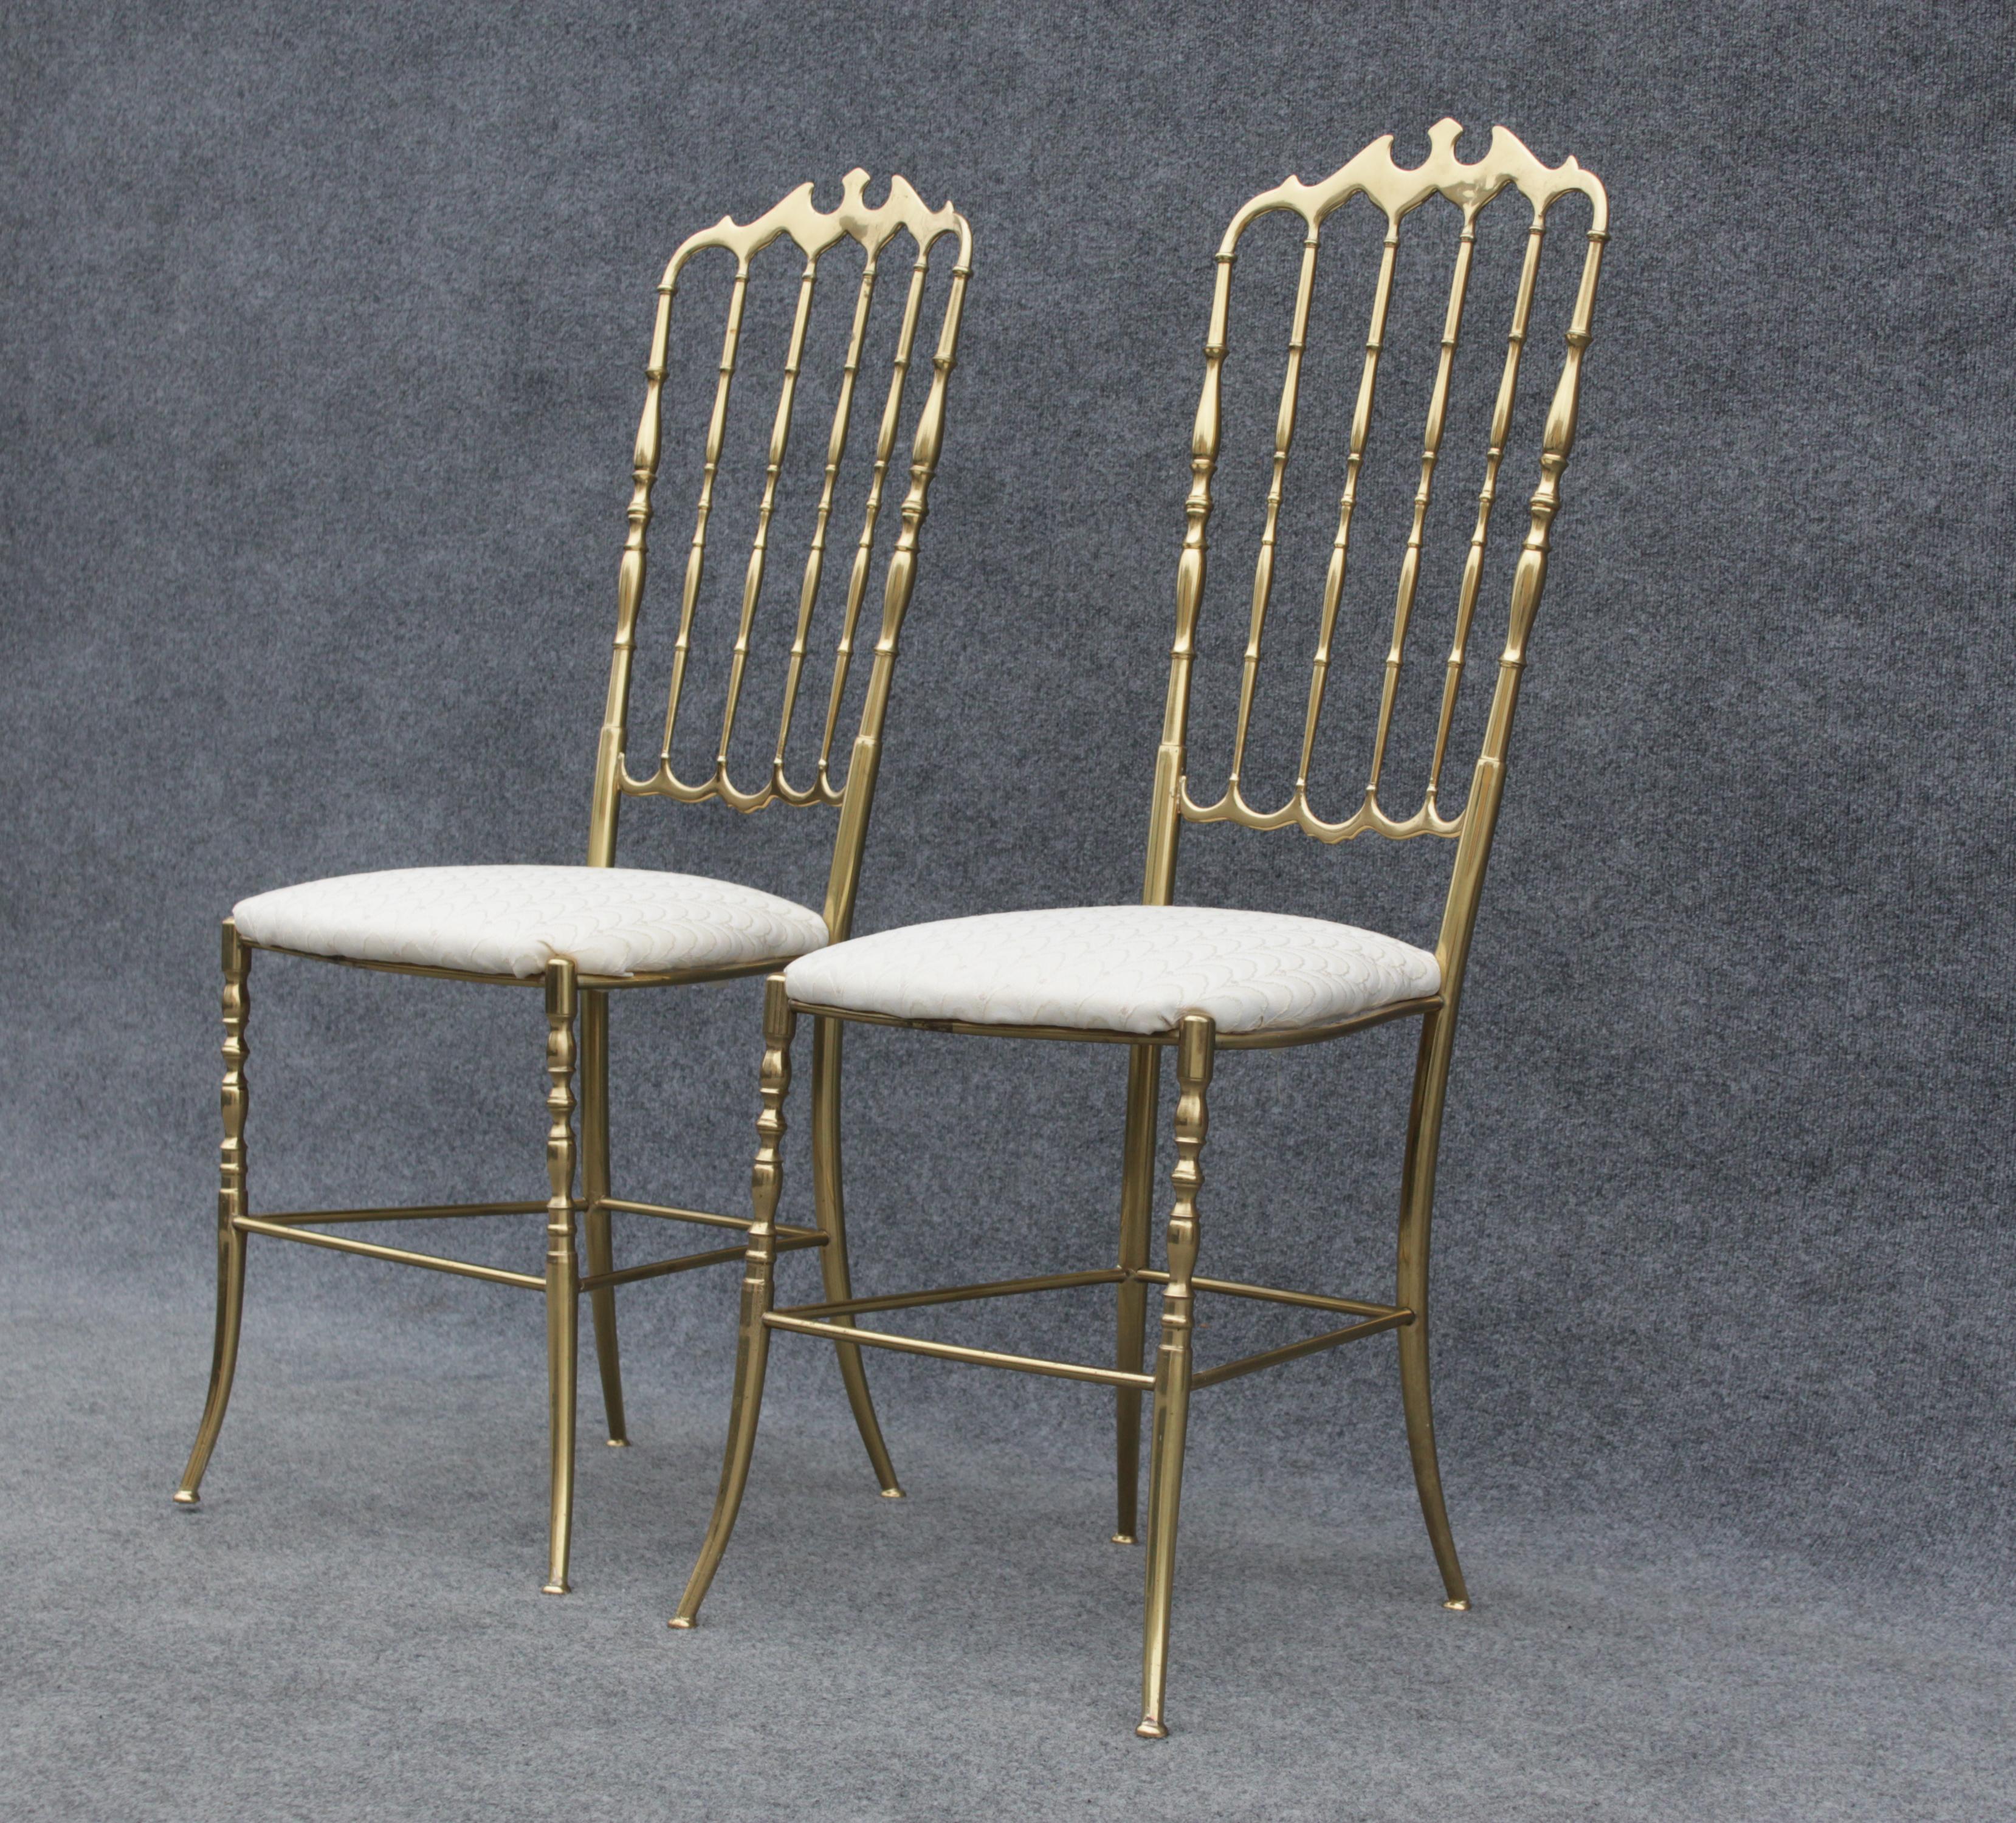 Pair of Solid Brass & White Upholstered Dining or Side Chairs by Chiavari Italy For Sale 1